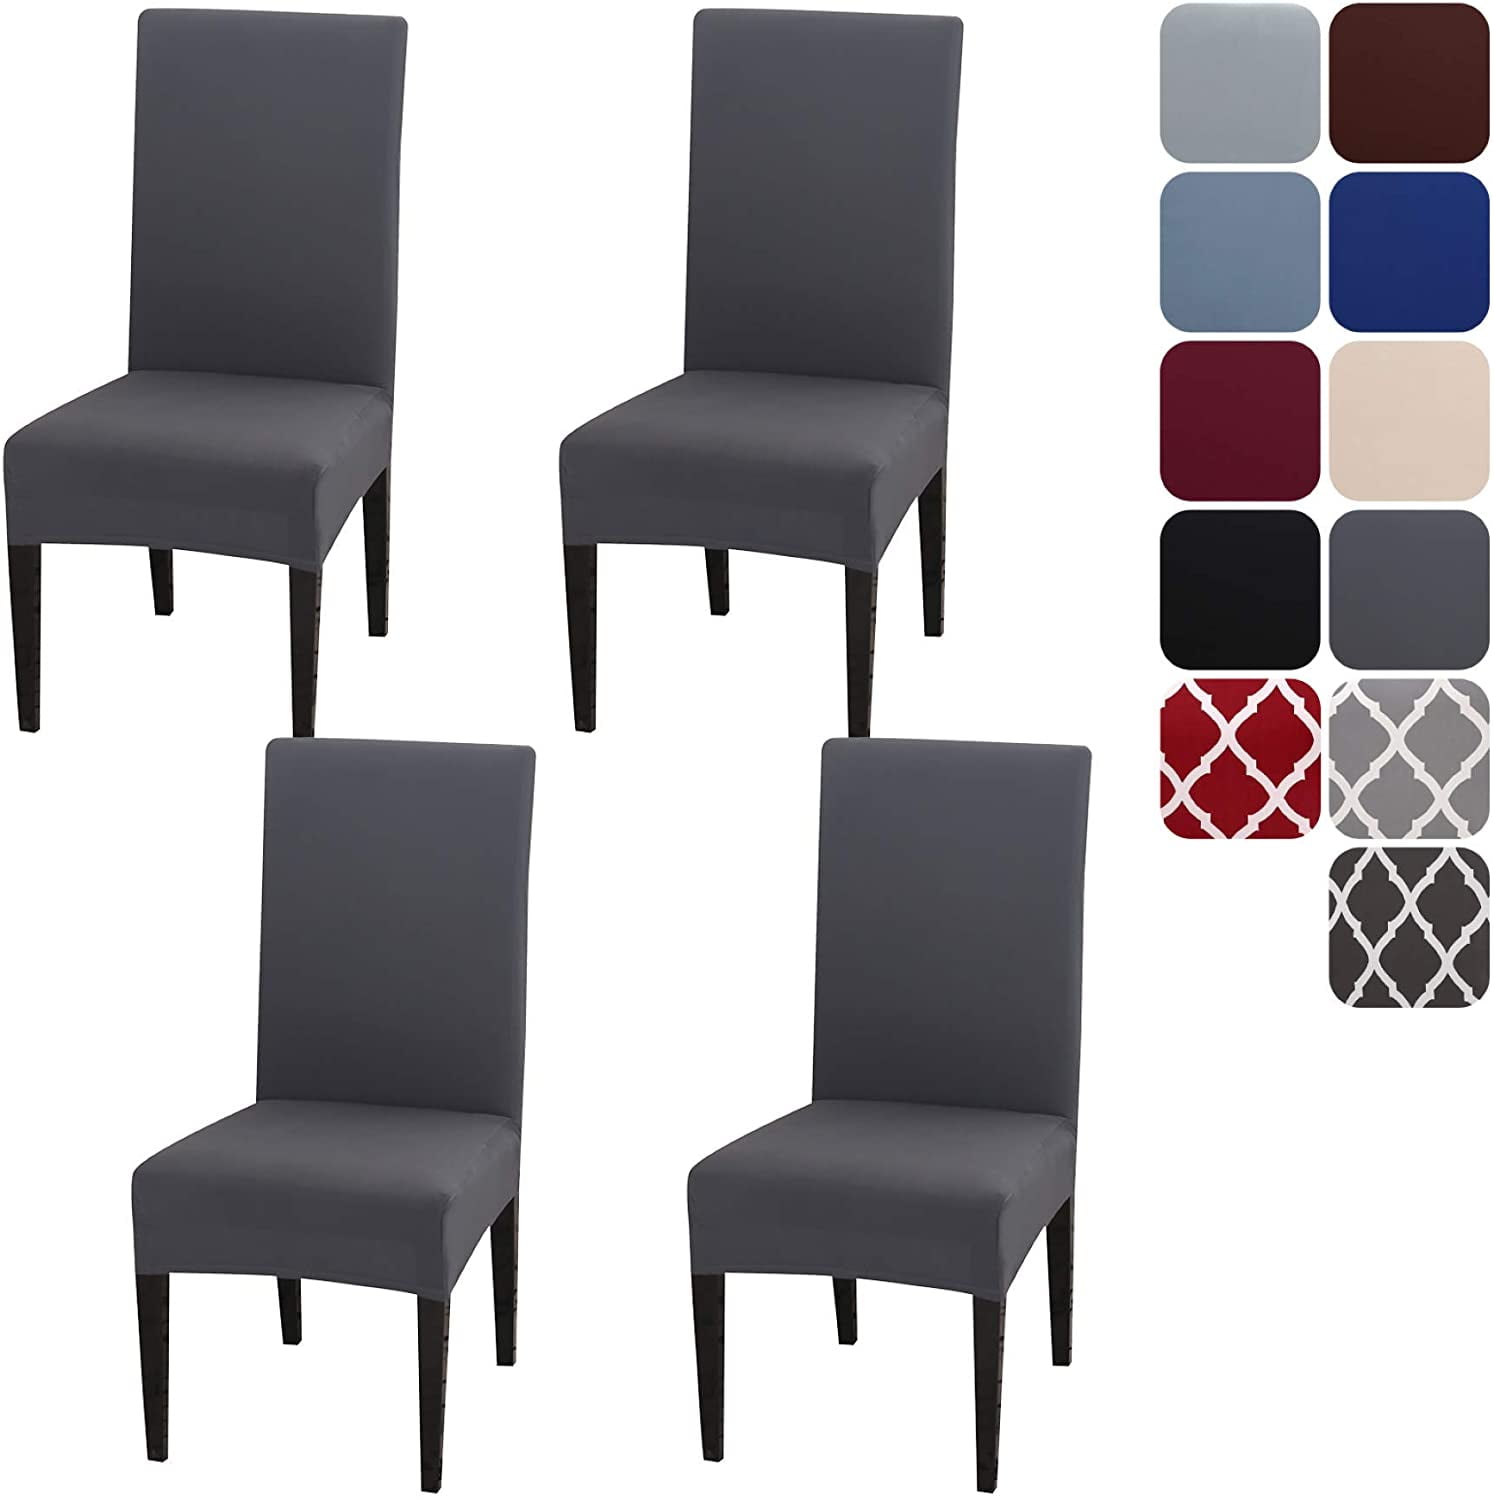 Stretch Chair Cover Slipcover Universal Removable Dining Room Banquet Slipcovers 